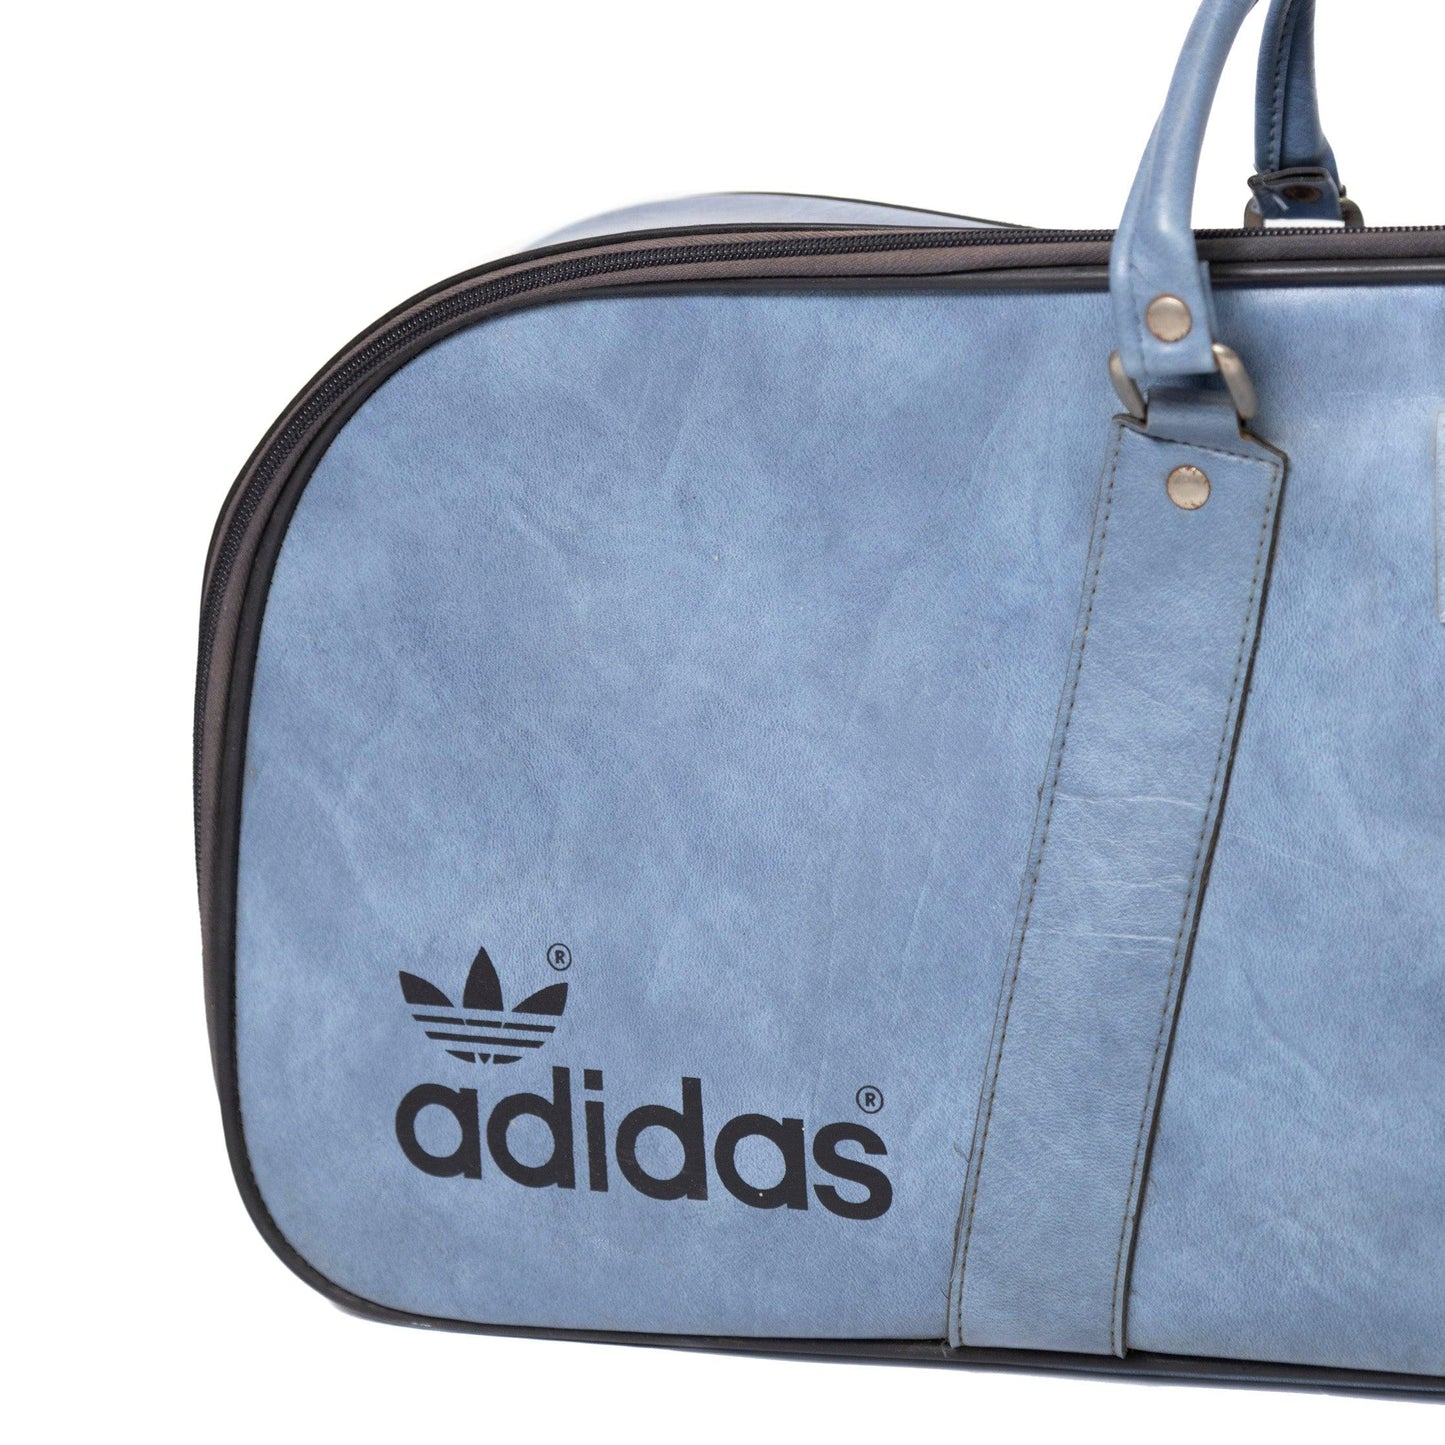 Adidas Baby Blue Racquet Bag - Known Source